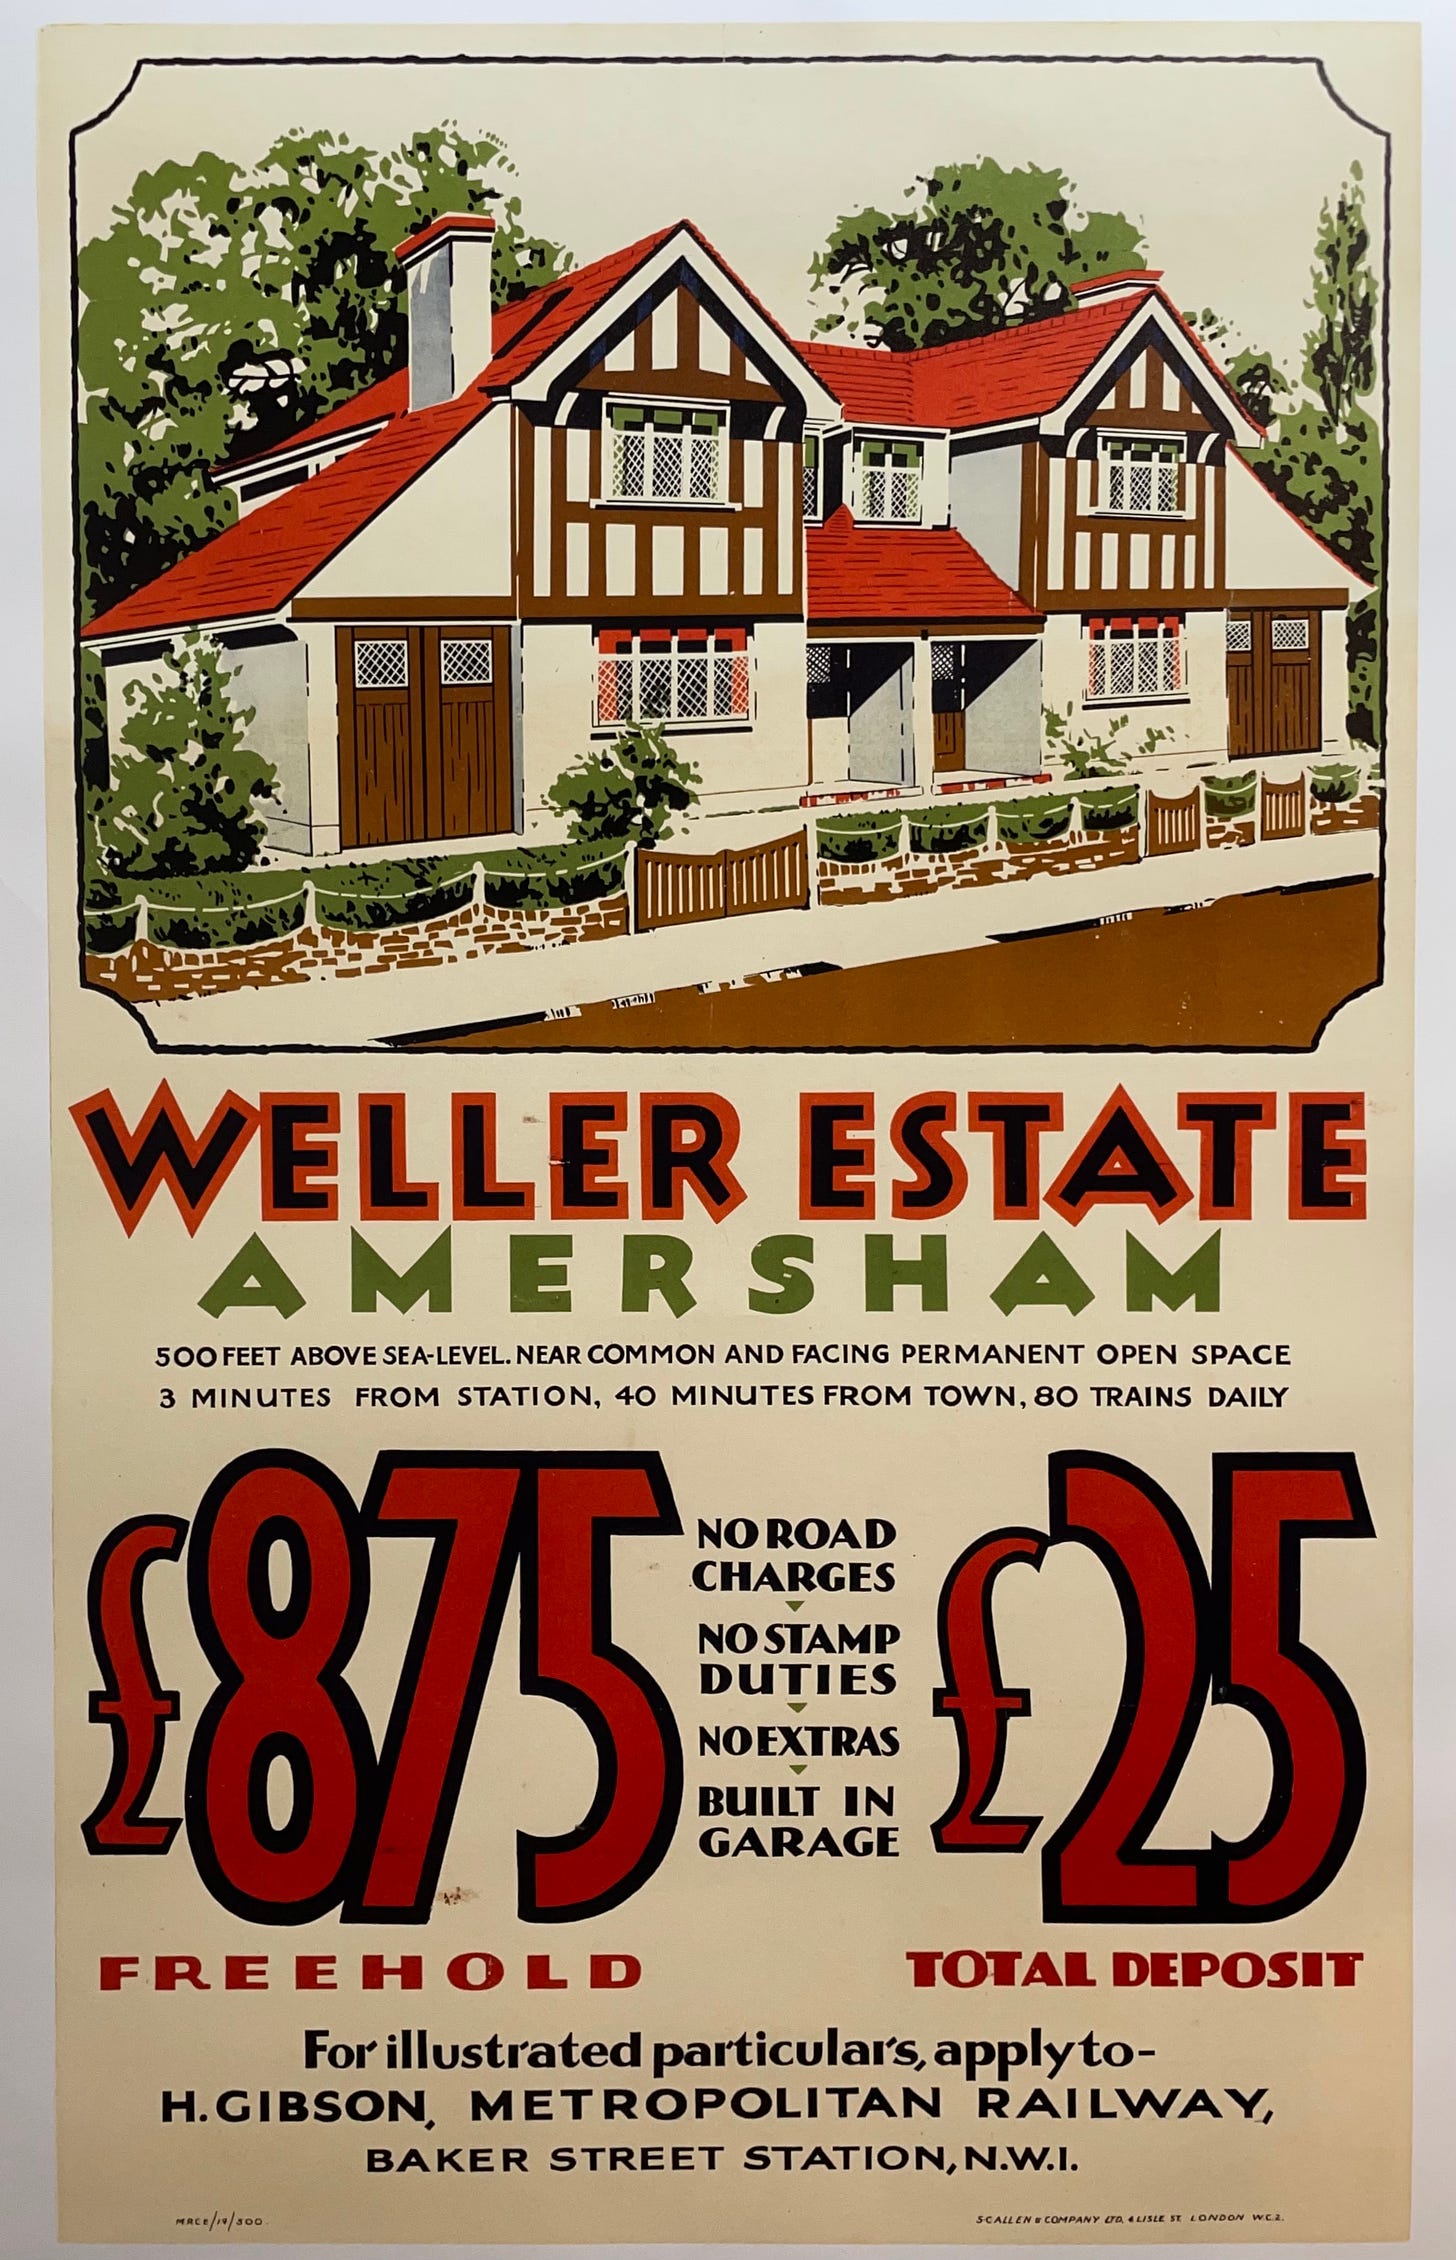 A poster advertising new homes in the Weller Estate Amersham